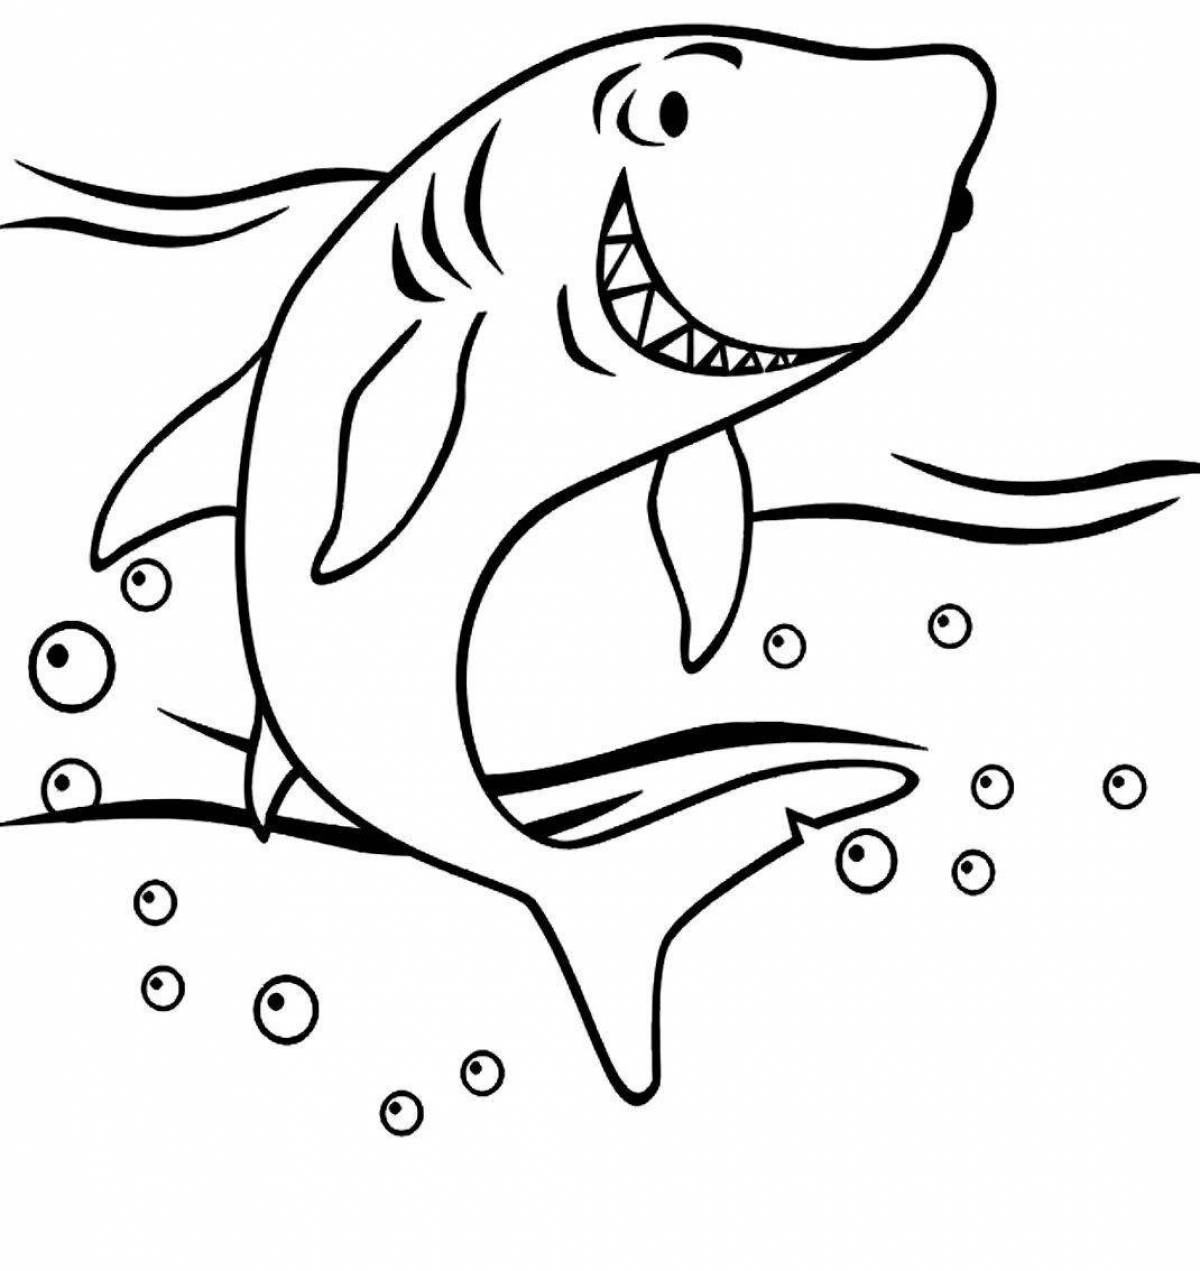 A fun shark coloring book for 4-5 year olds